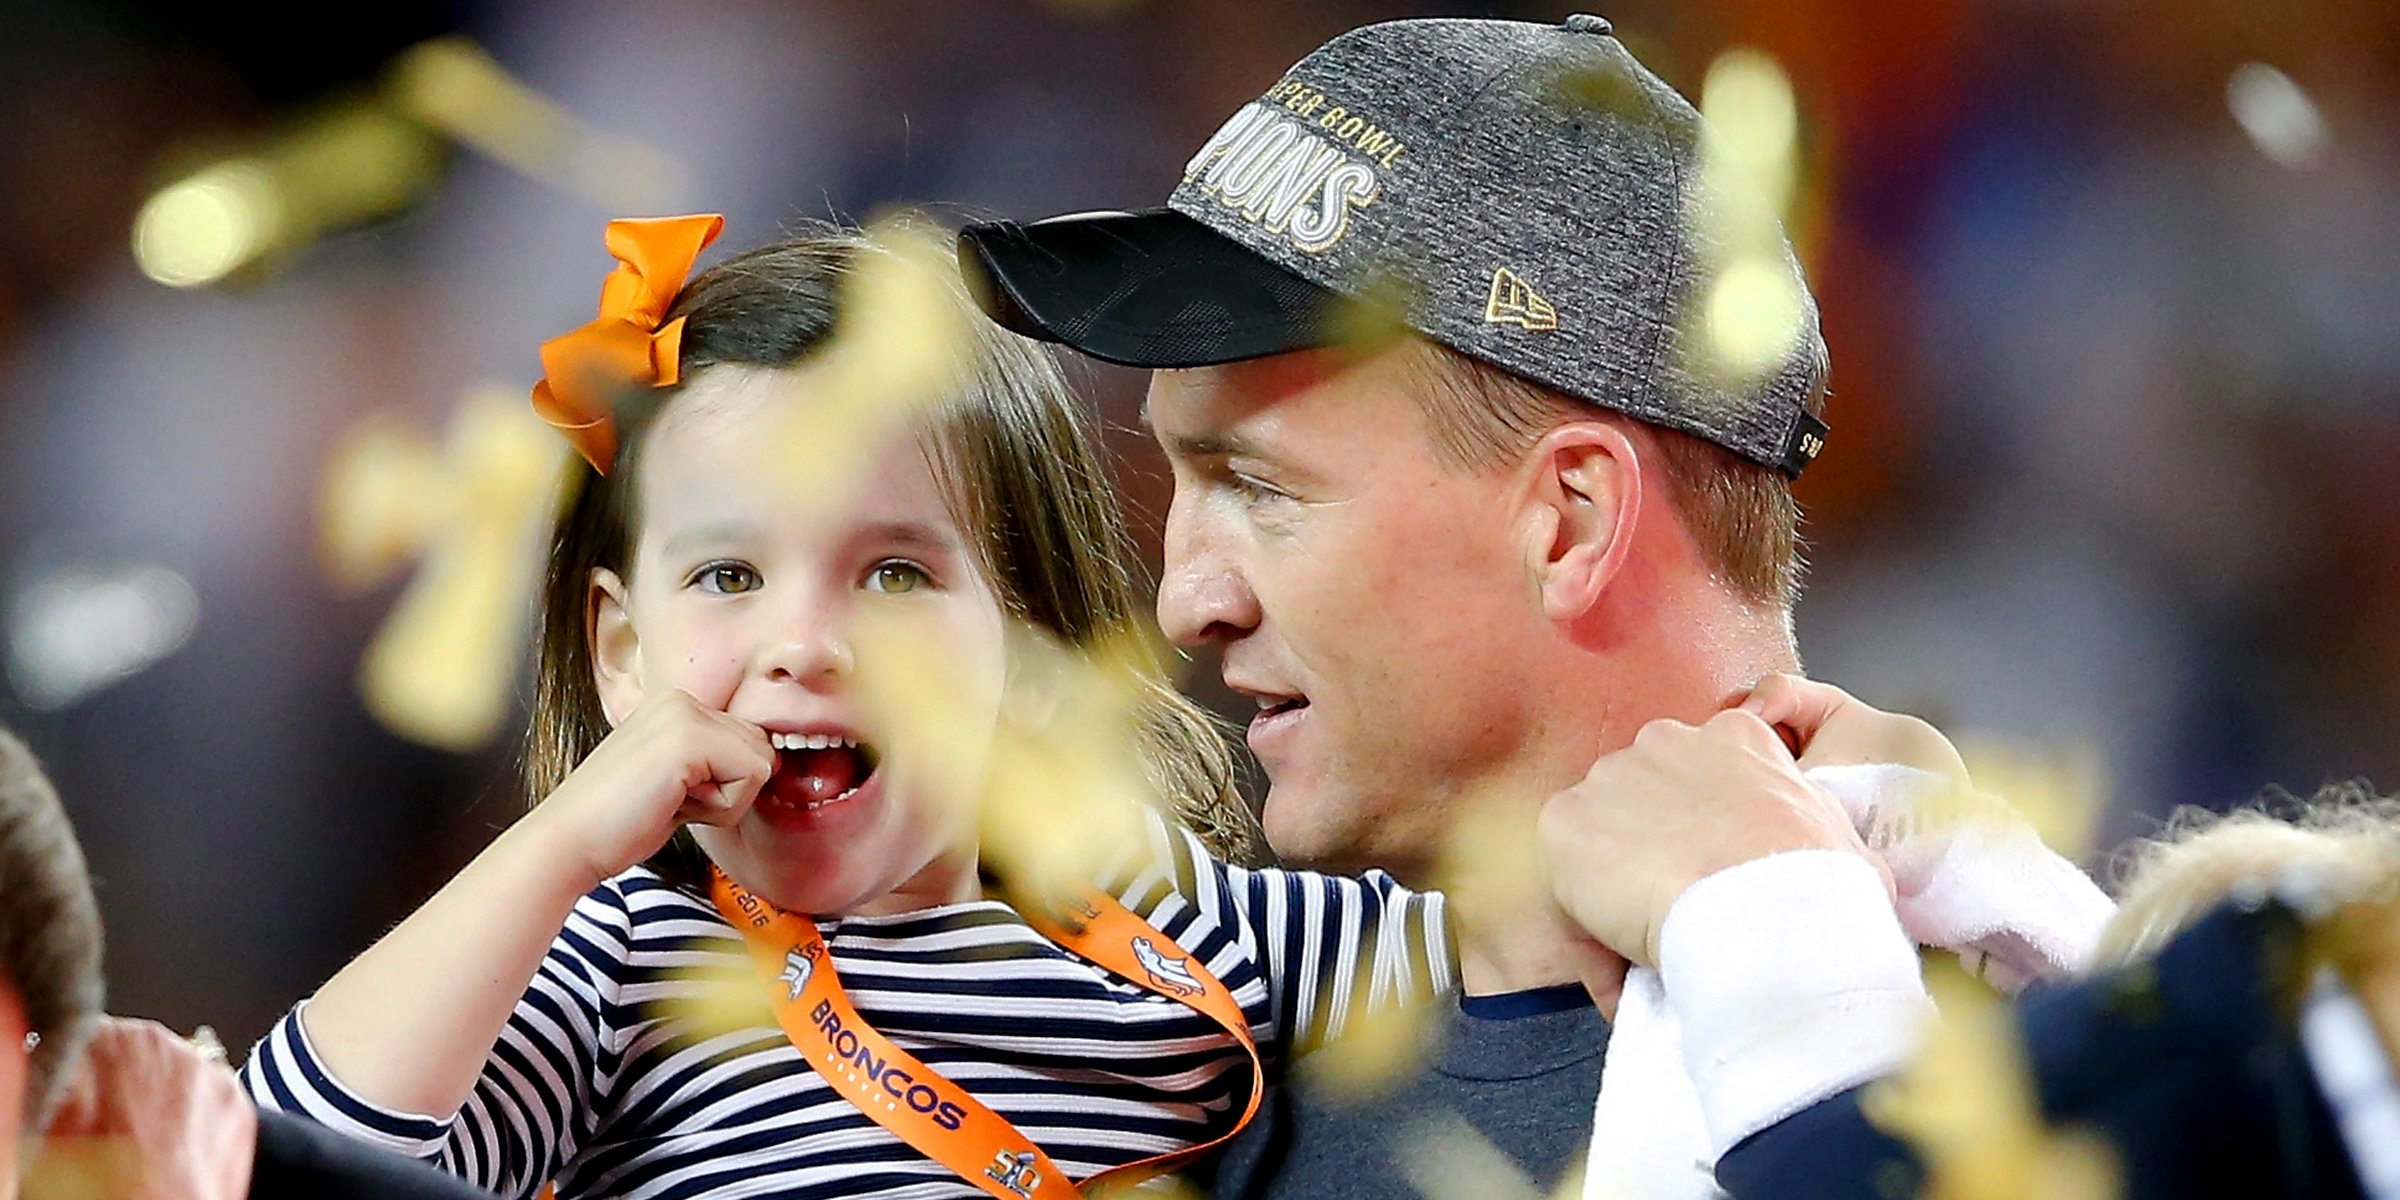 Mosley Thompson Manning and Peyton Manning | Source: Getty Images